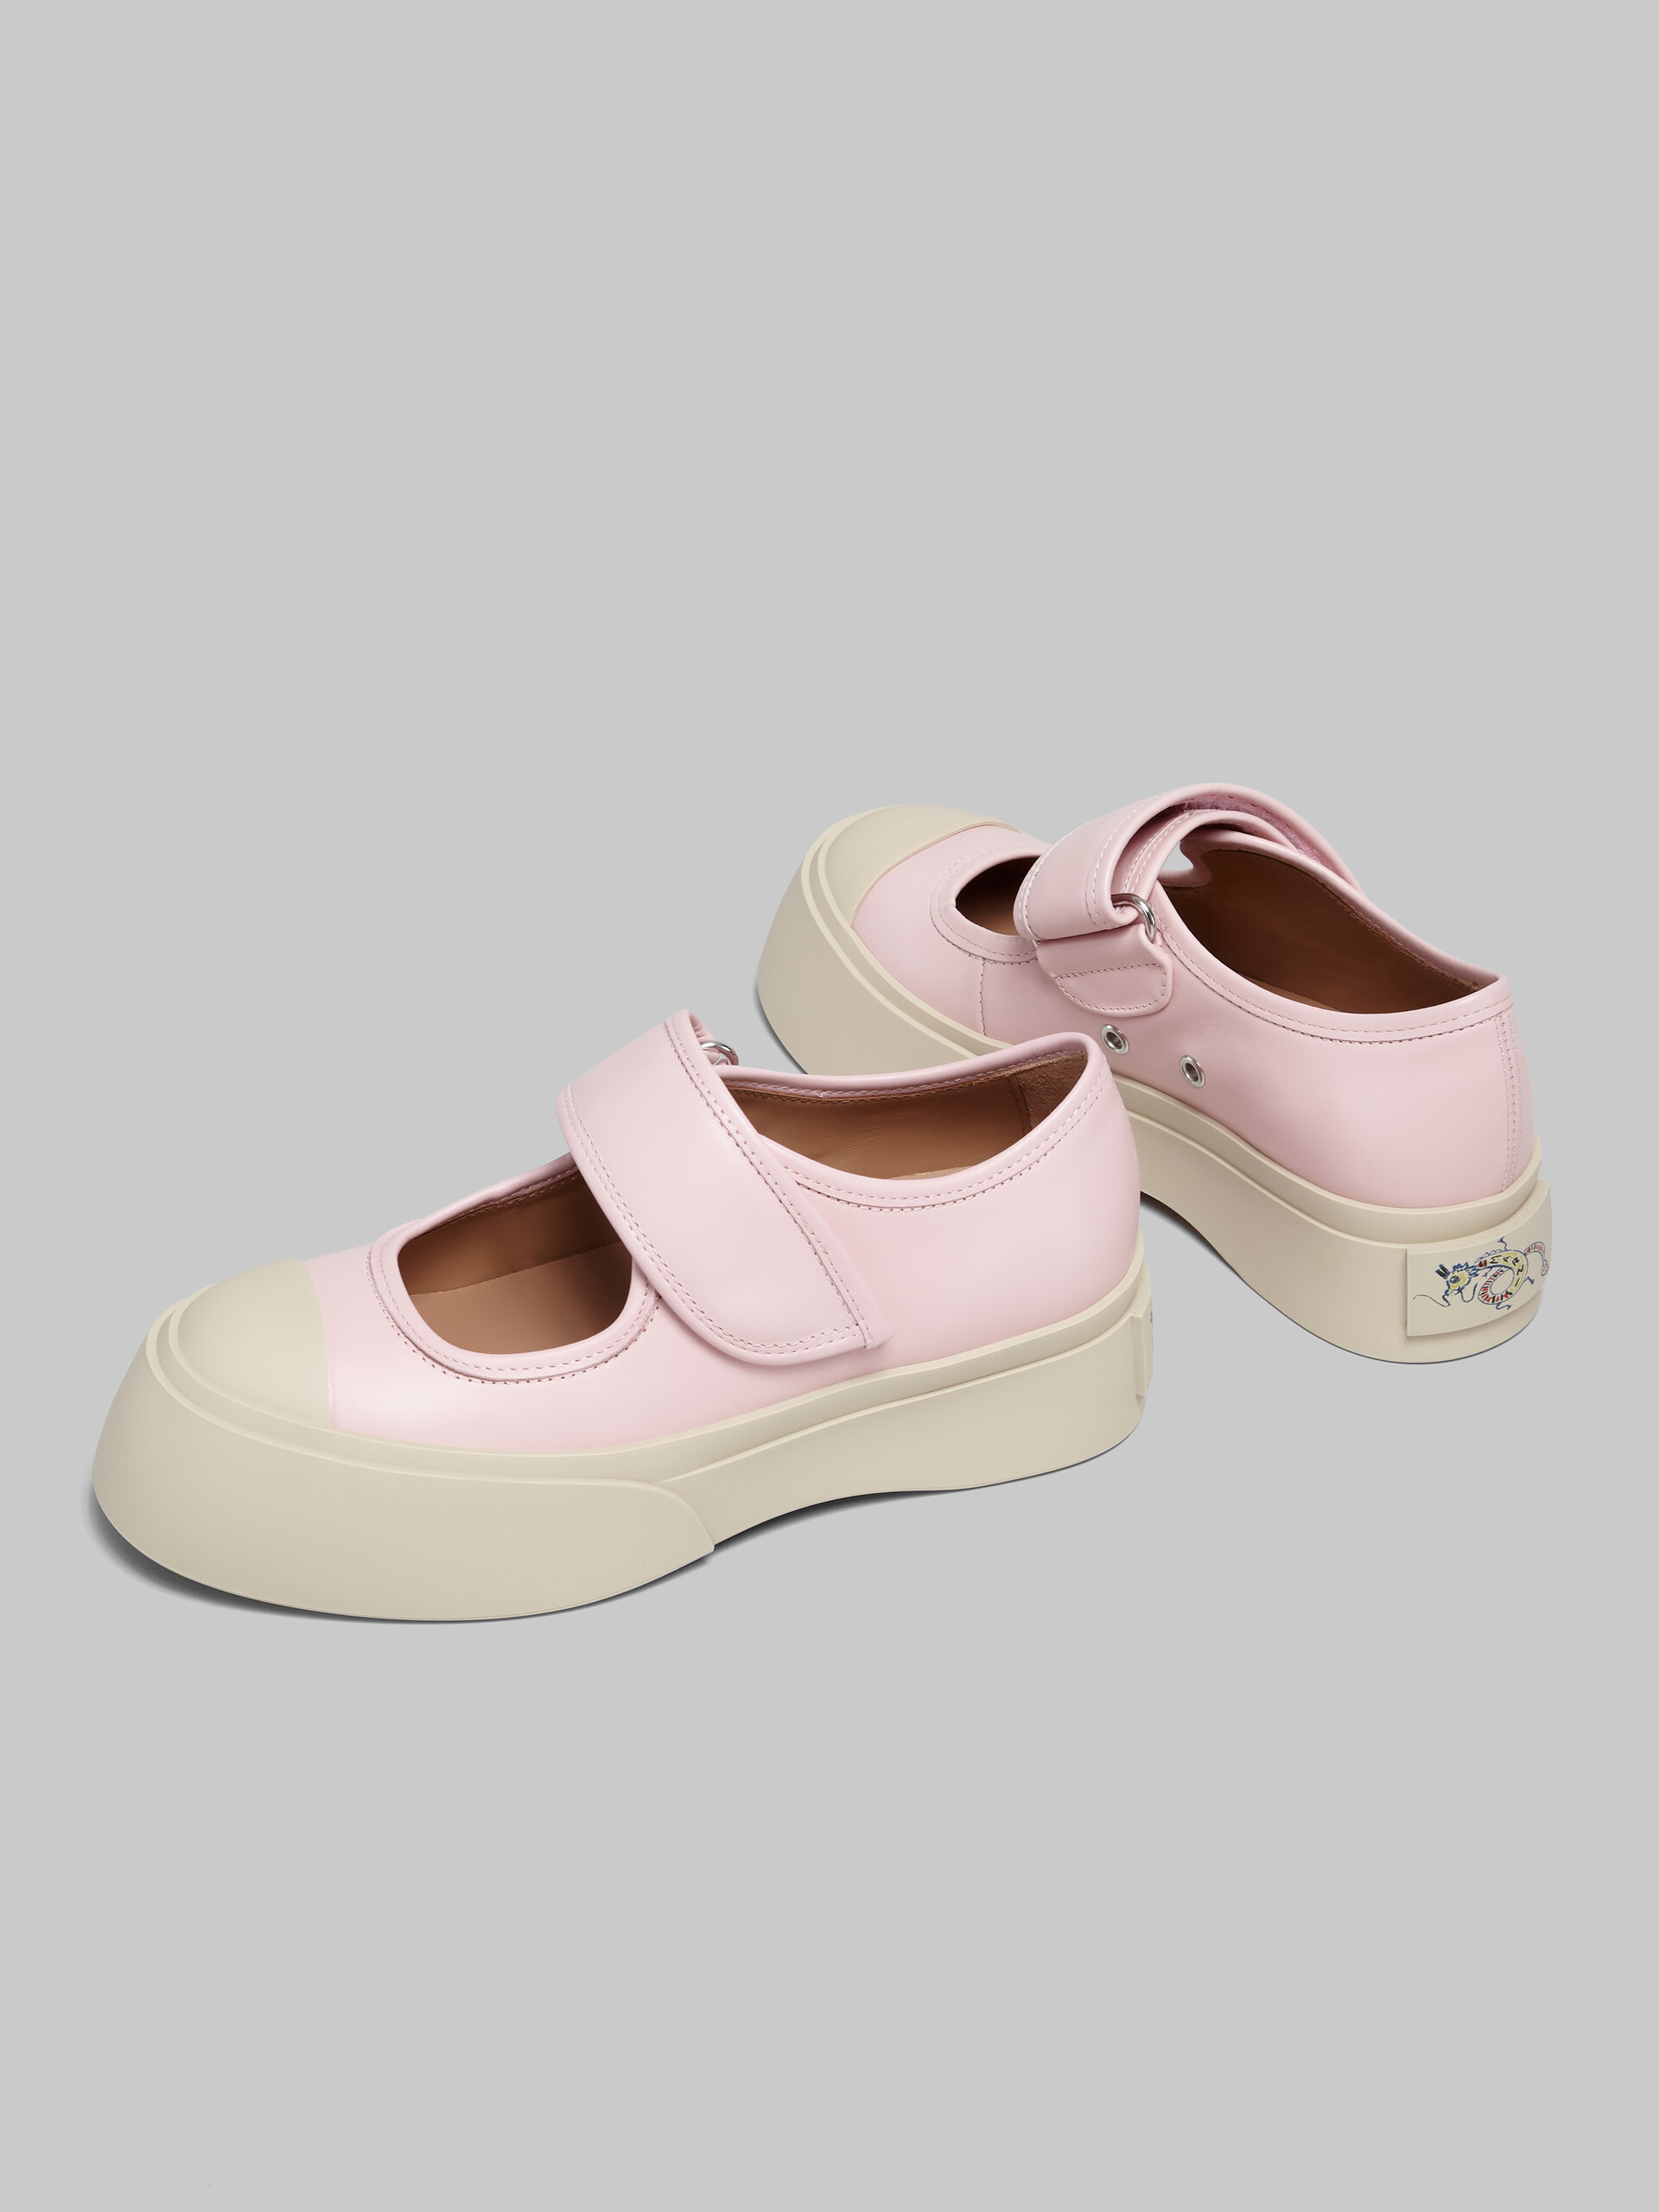 Light pink nappa leather Mary Jane sneaker - Sneakers - Image 5